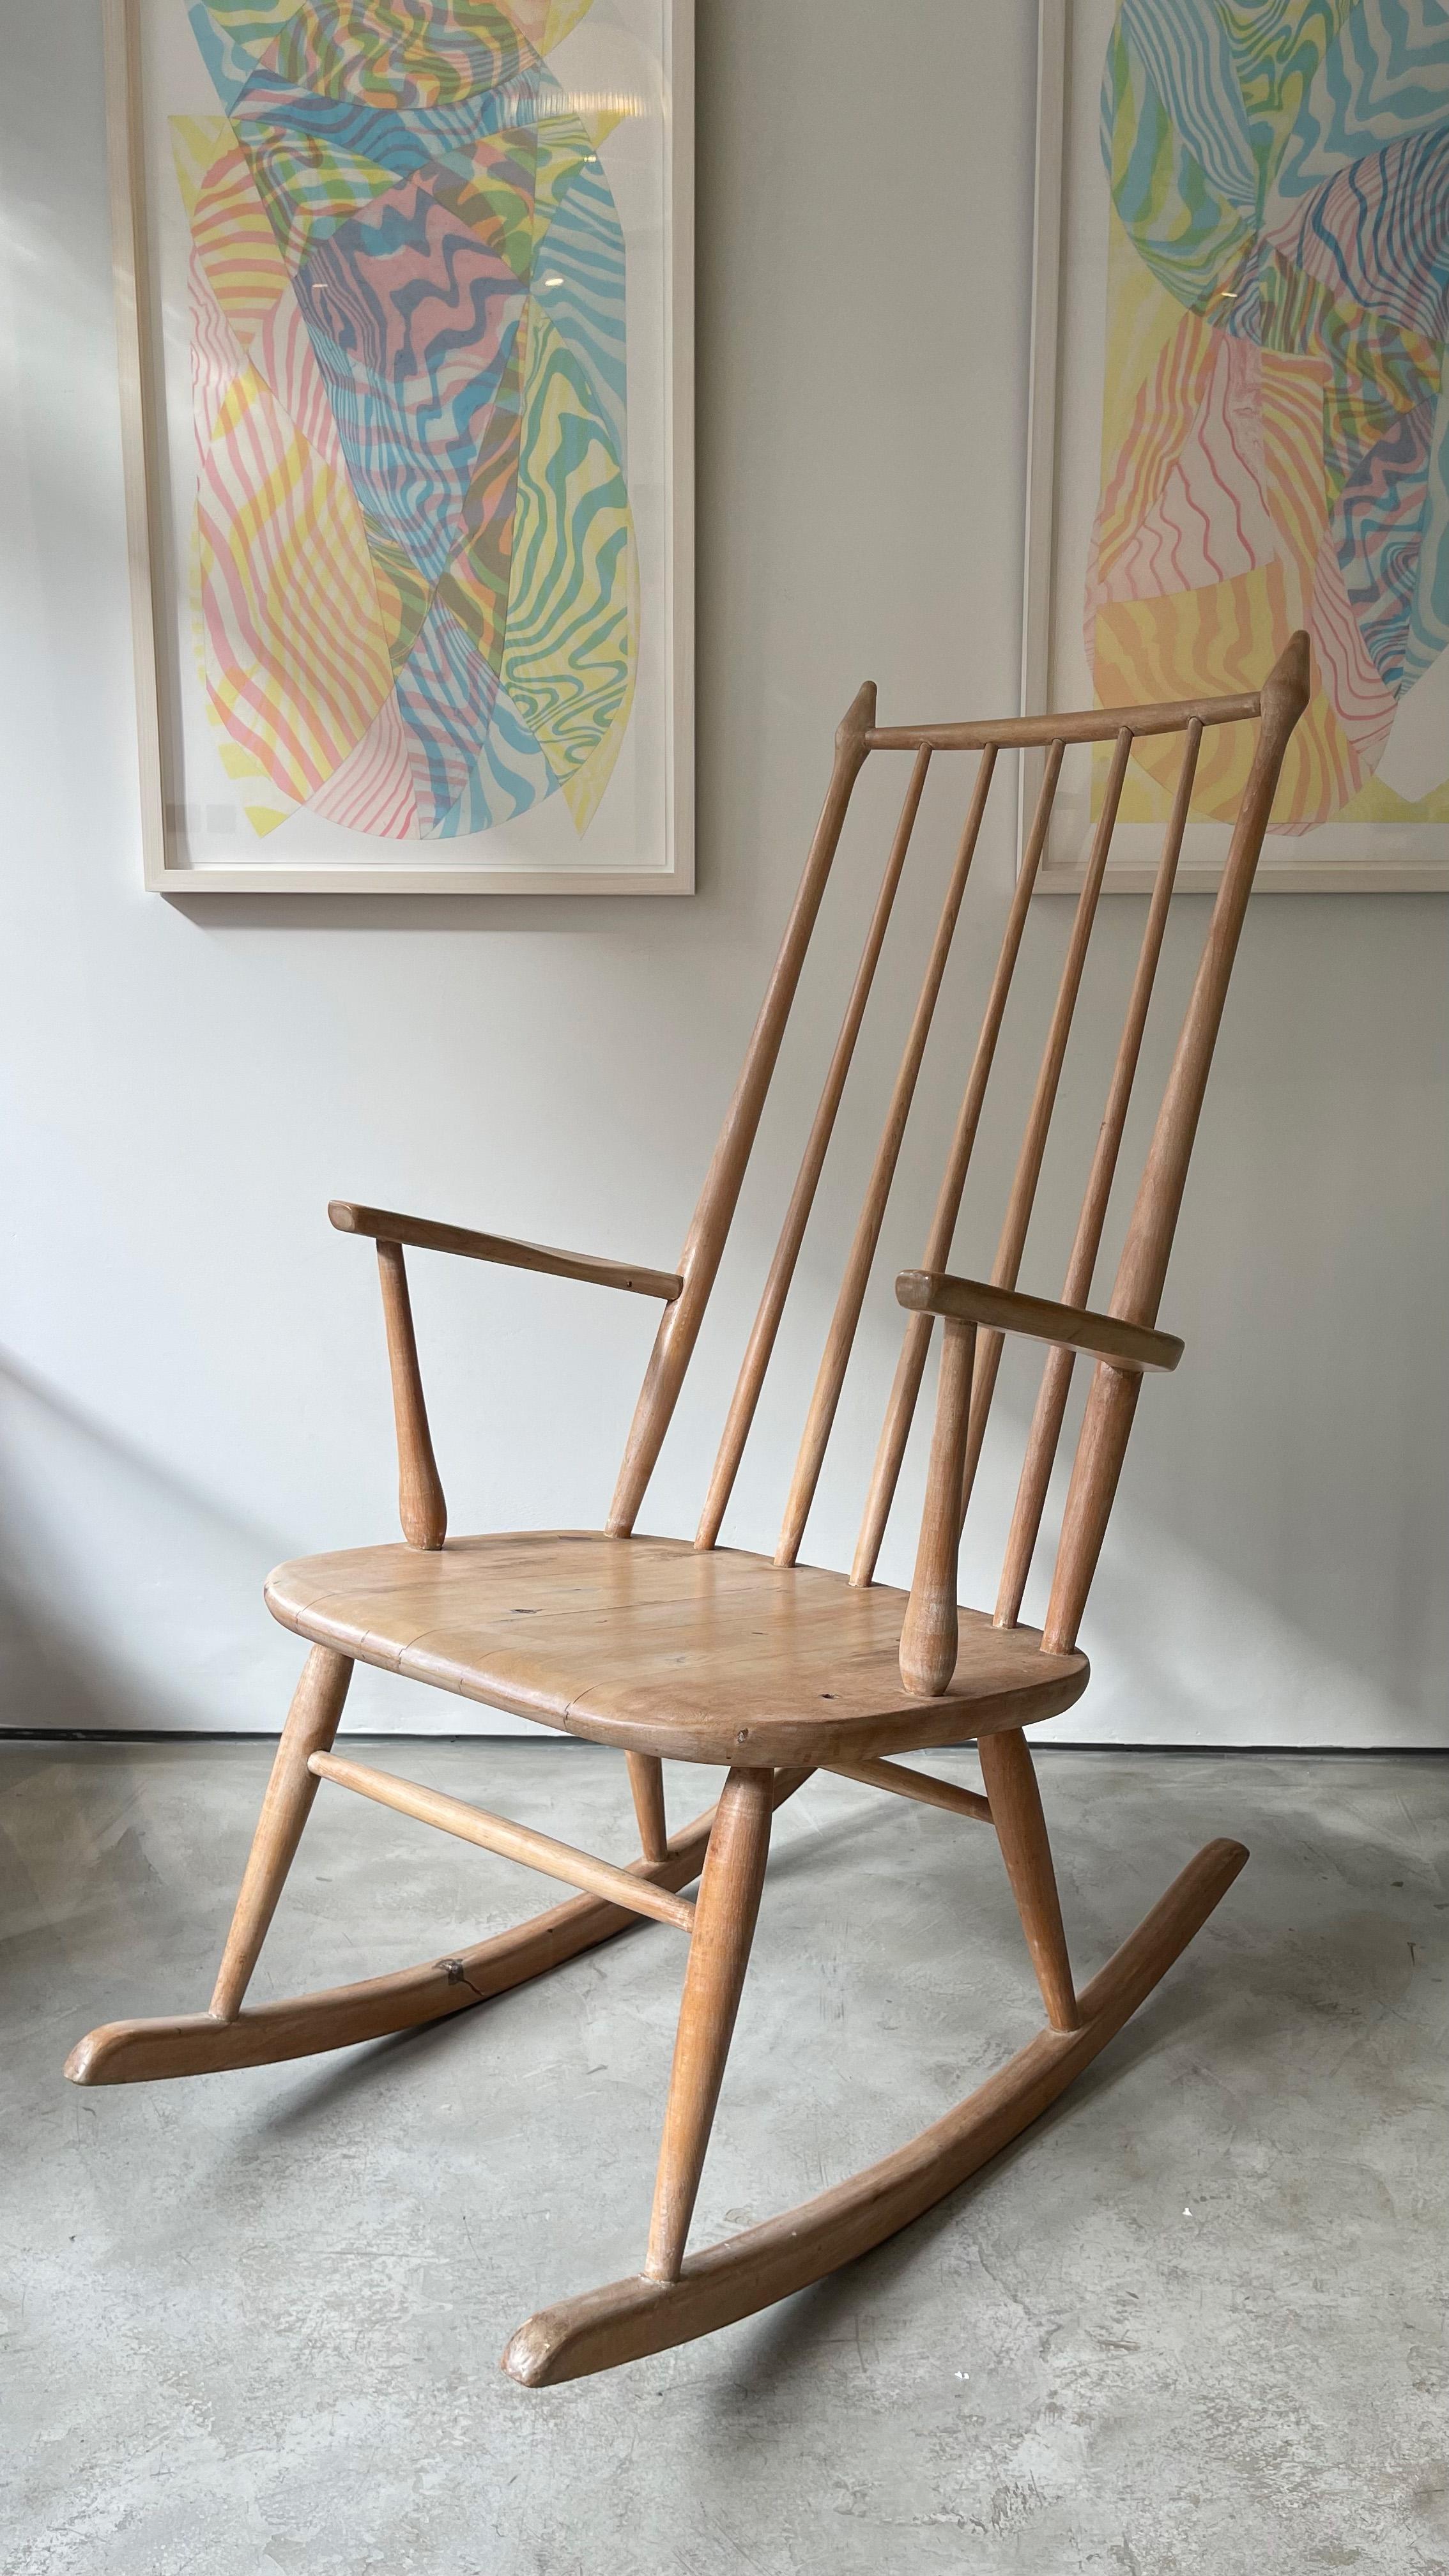 Skandinavian Oak Mid Century Rocking Chair.

Designer and manufacturer are unknown, though it appears to have been stripped back at some point. The design echos many other great designers of the time, Varjosen Puunjalostus, Yvgne Ekstrom and Ilmari